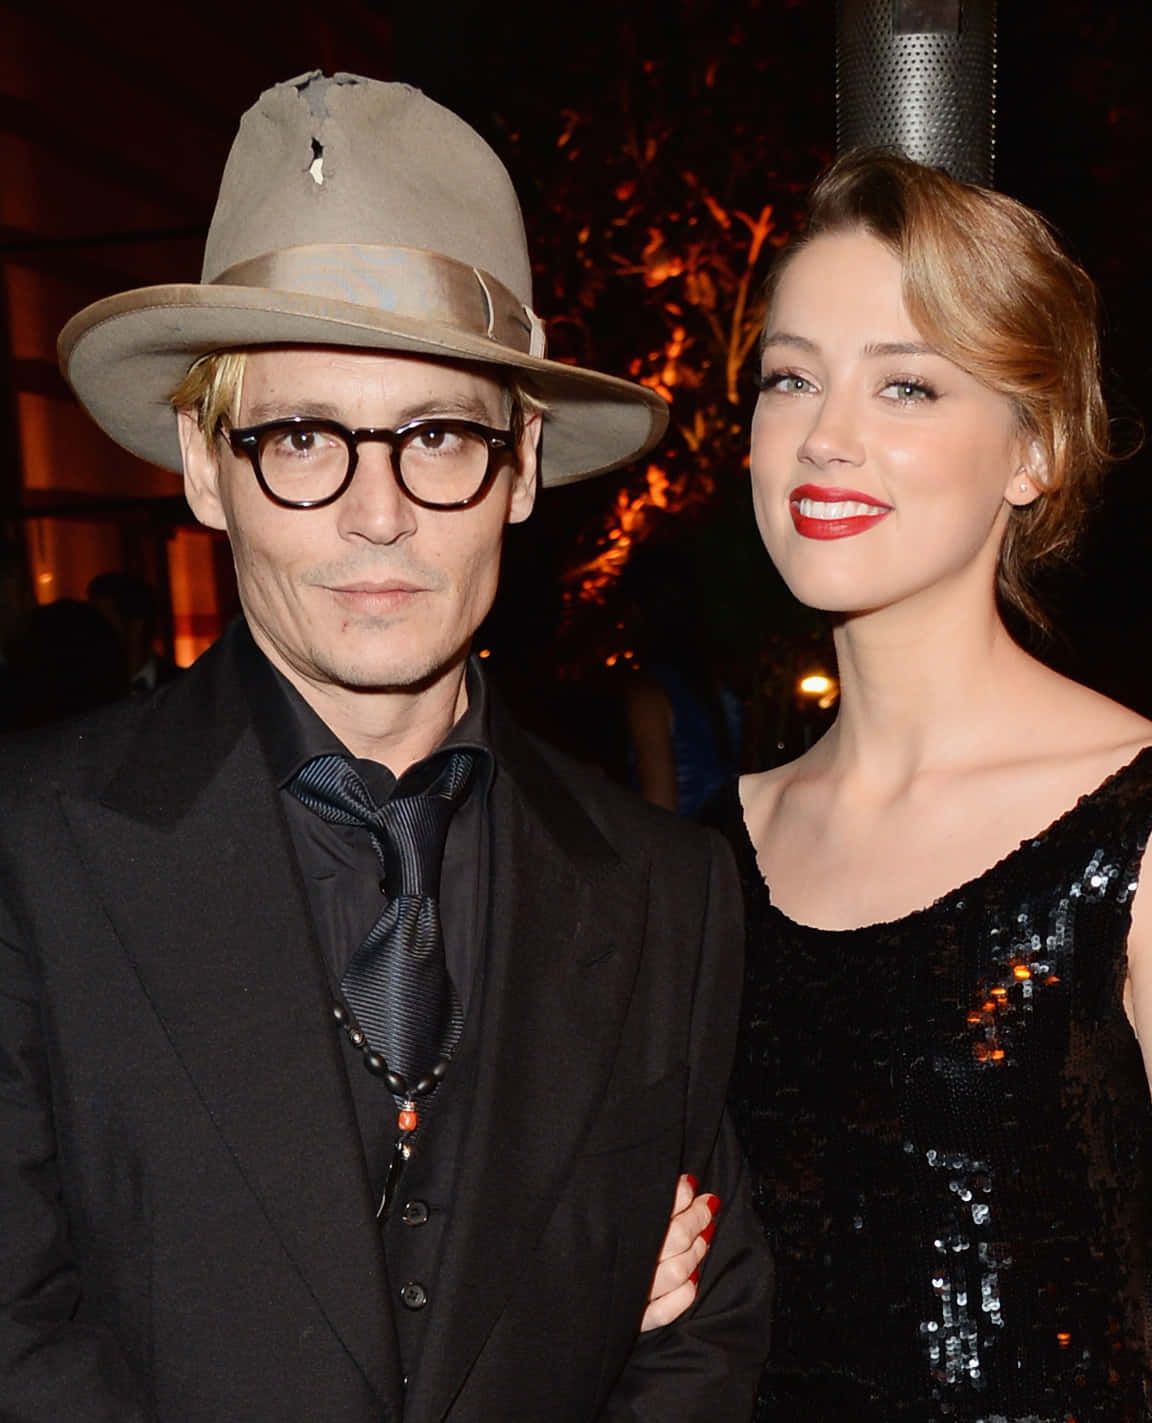 Johnny Depp and Amber Heard looking loving and stylish at the premier of The Rum Diary in 2011.